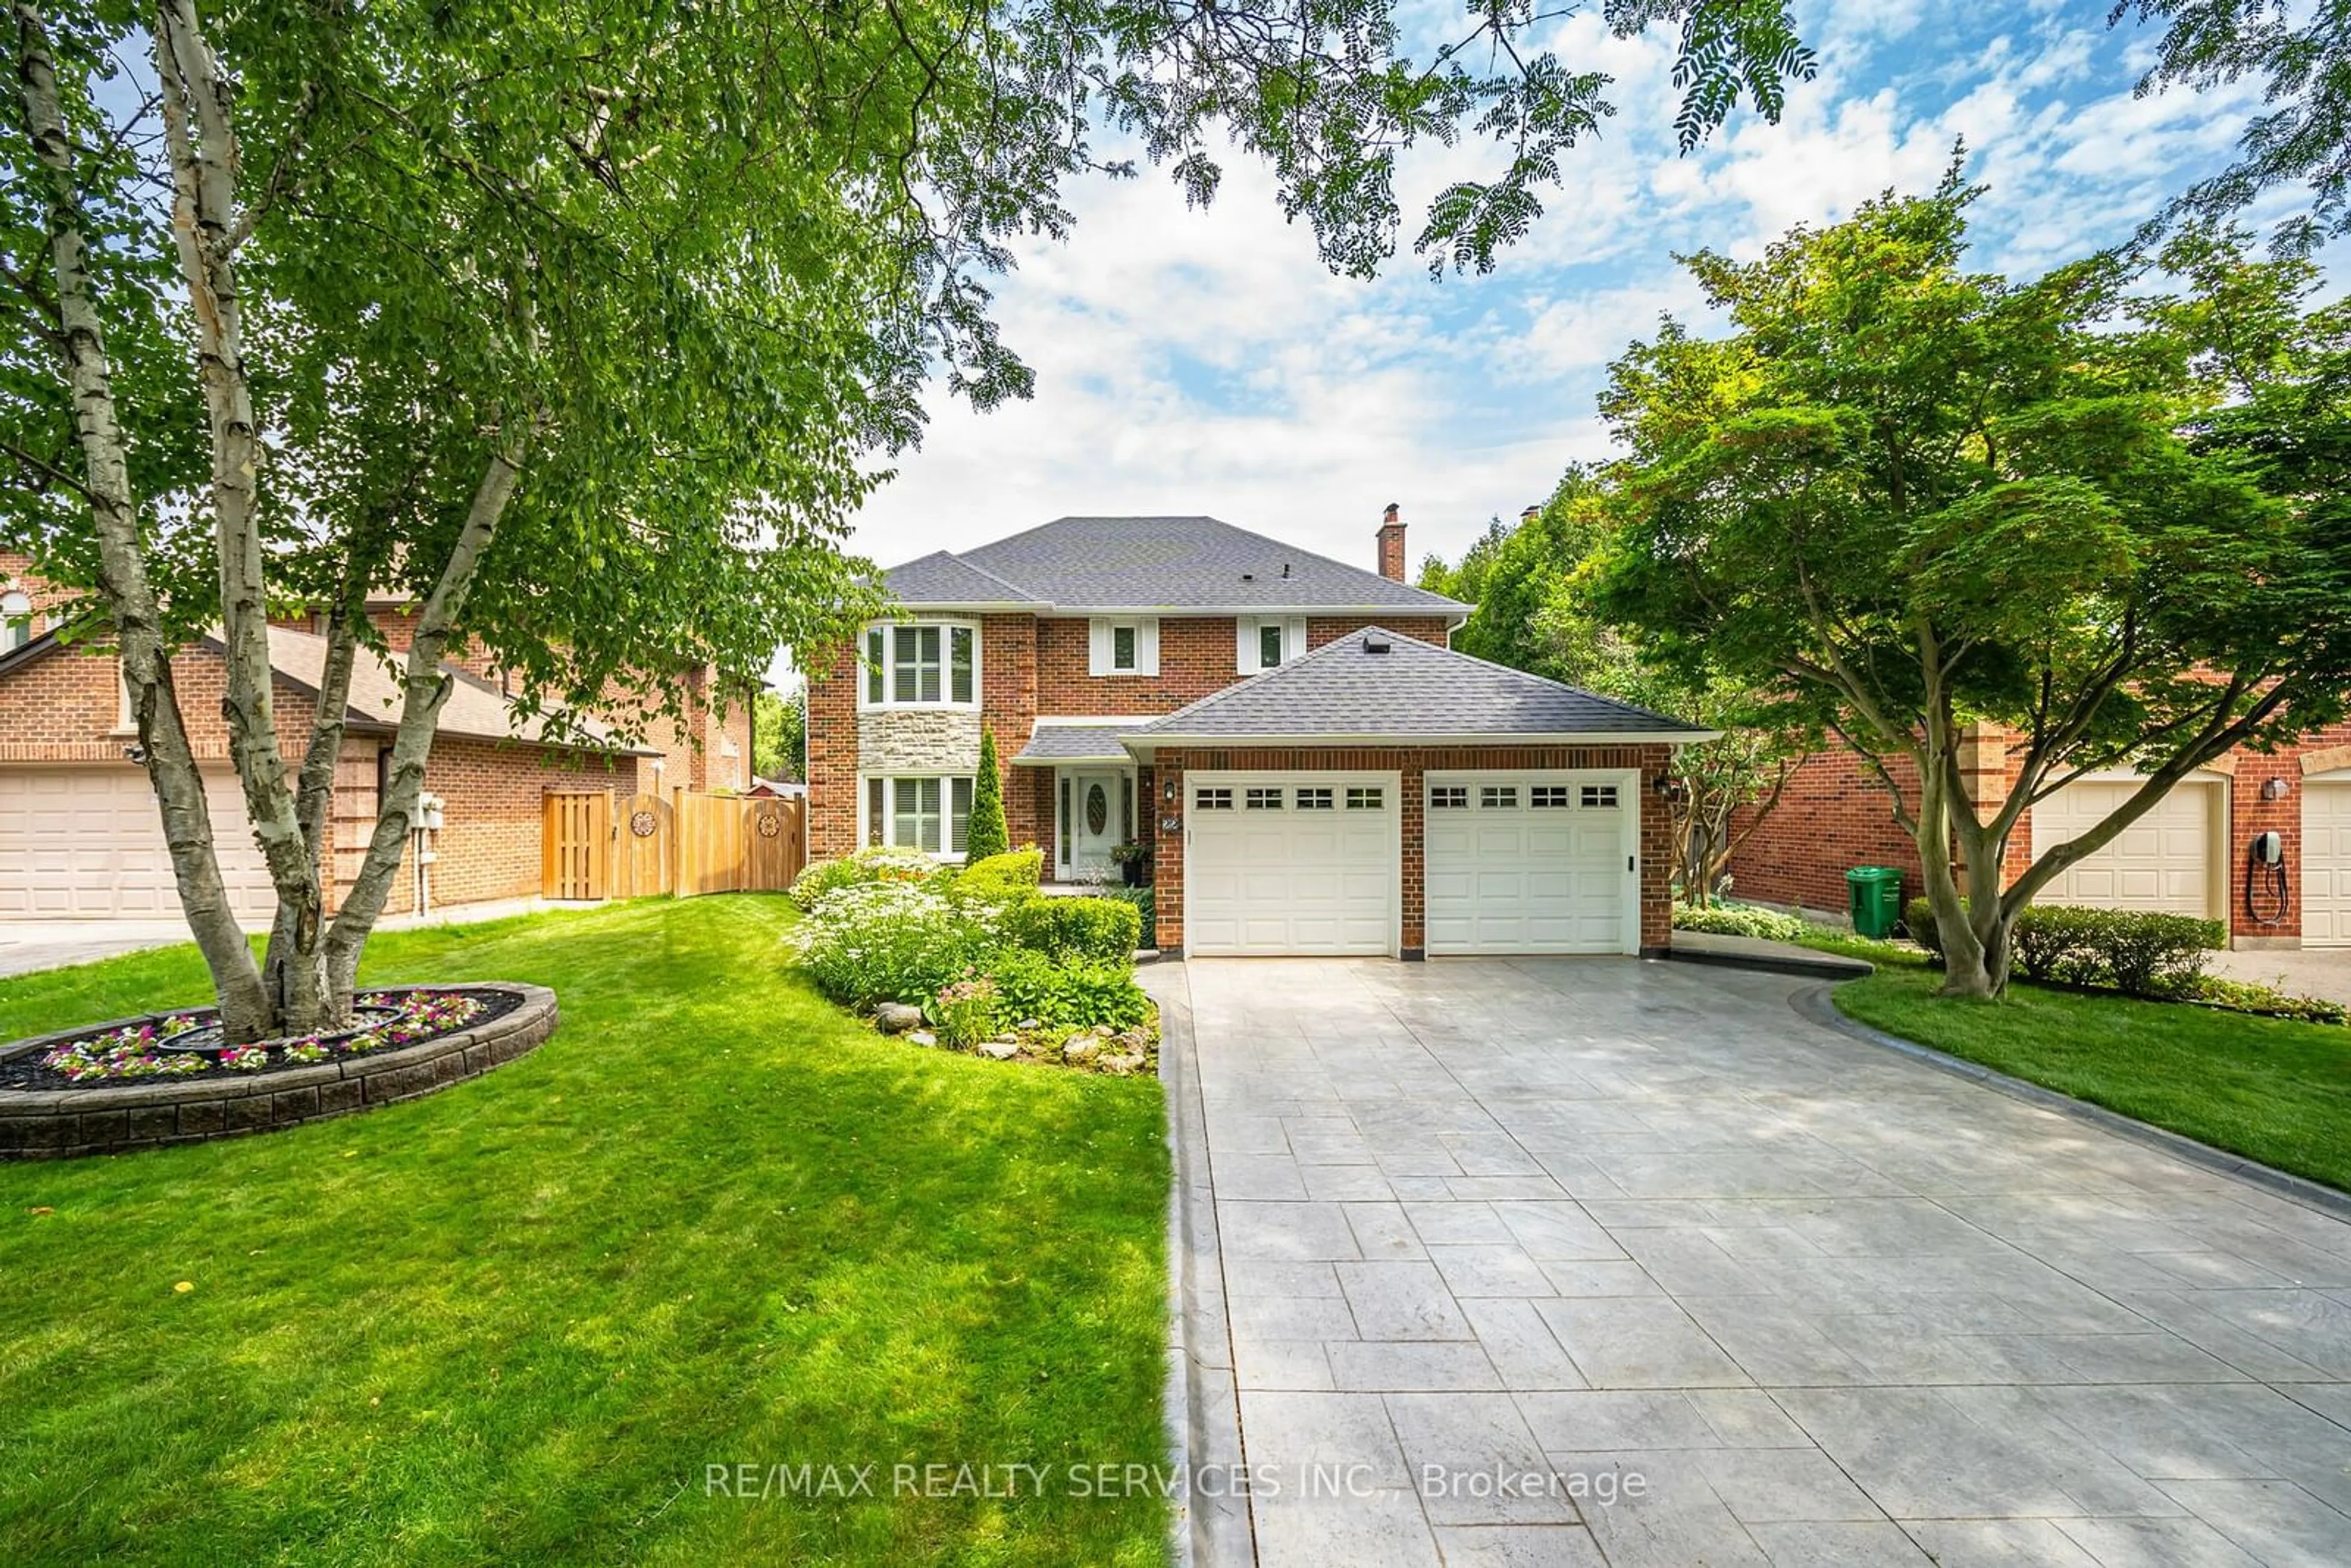 Home with brick exterior material for 22 Archer Crt, Brampton Ontario L6Z 3J3